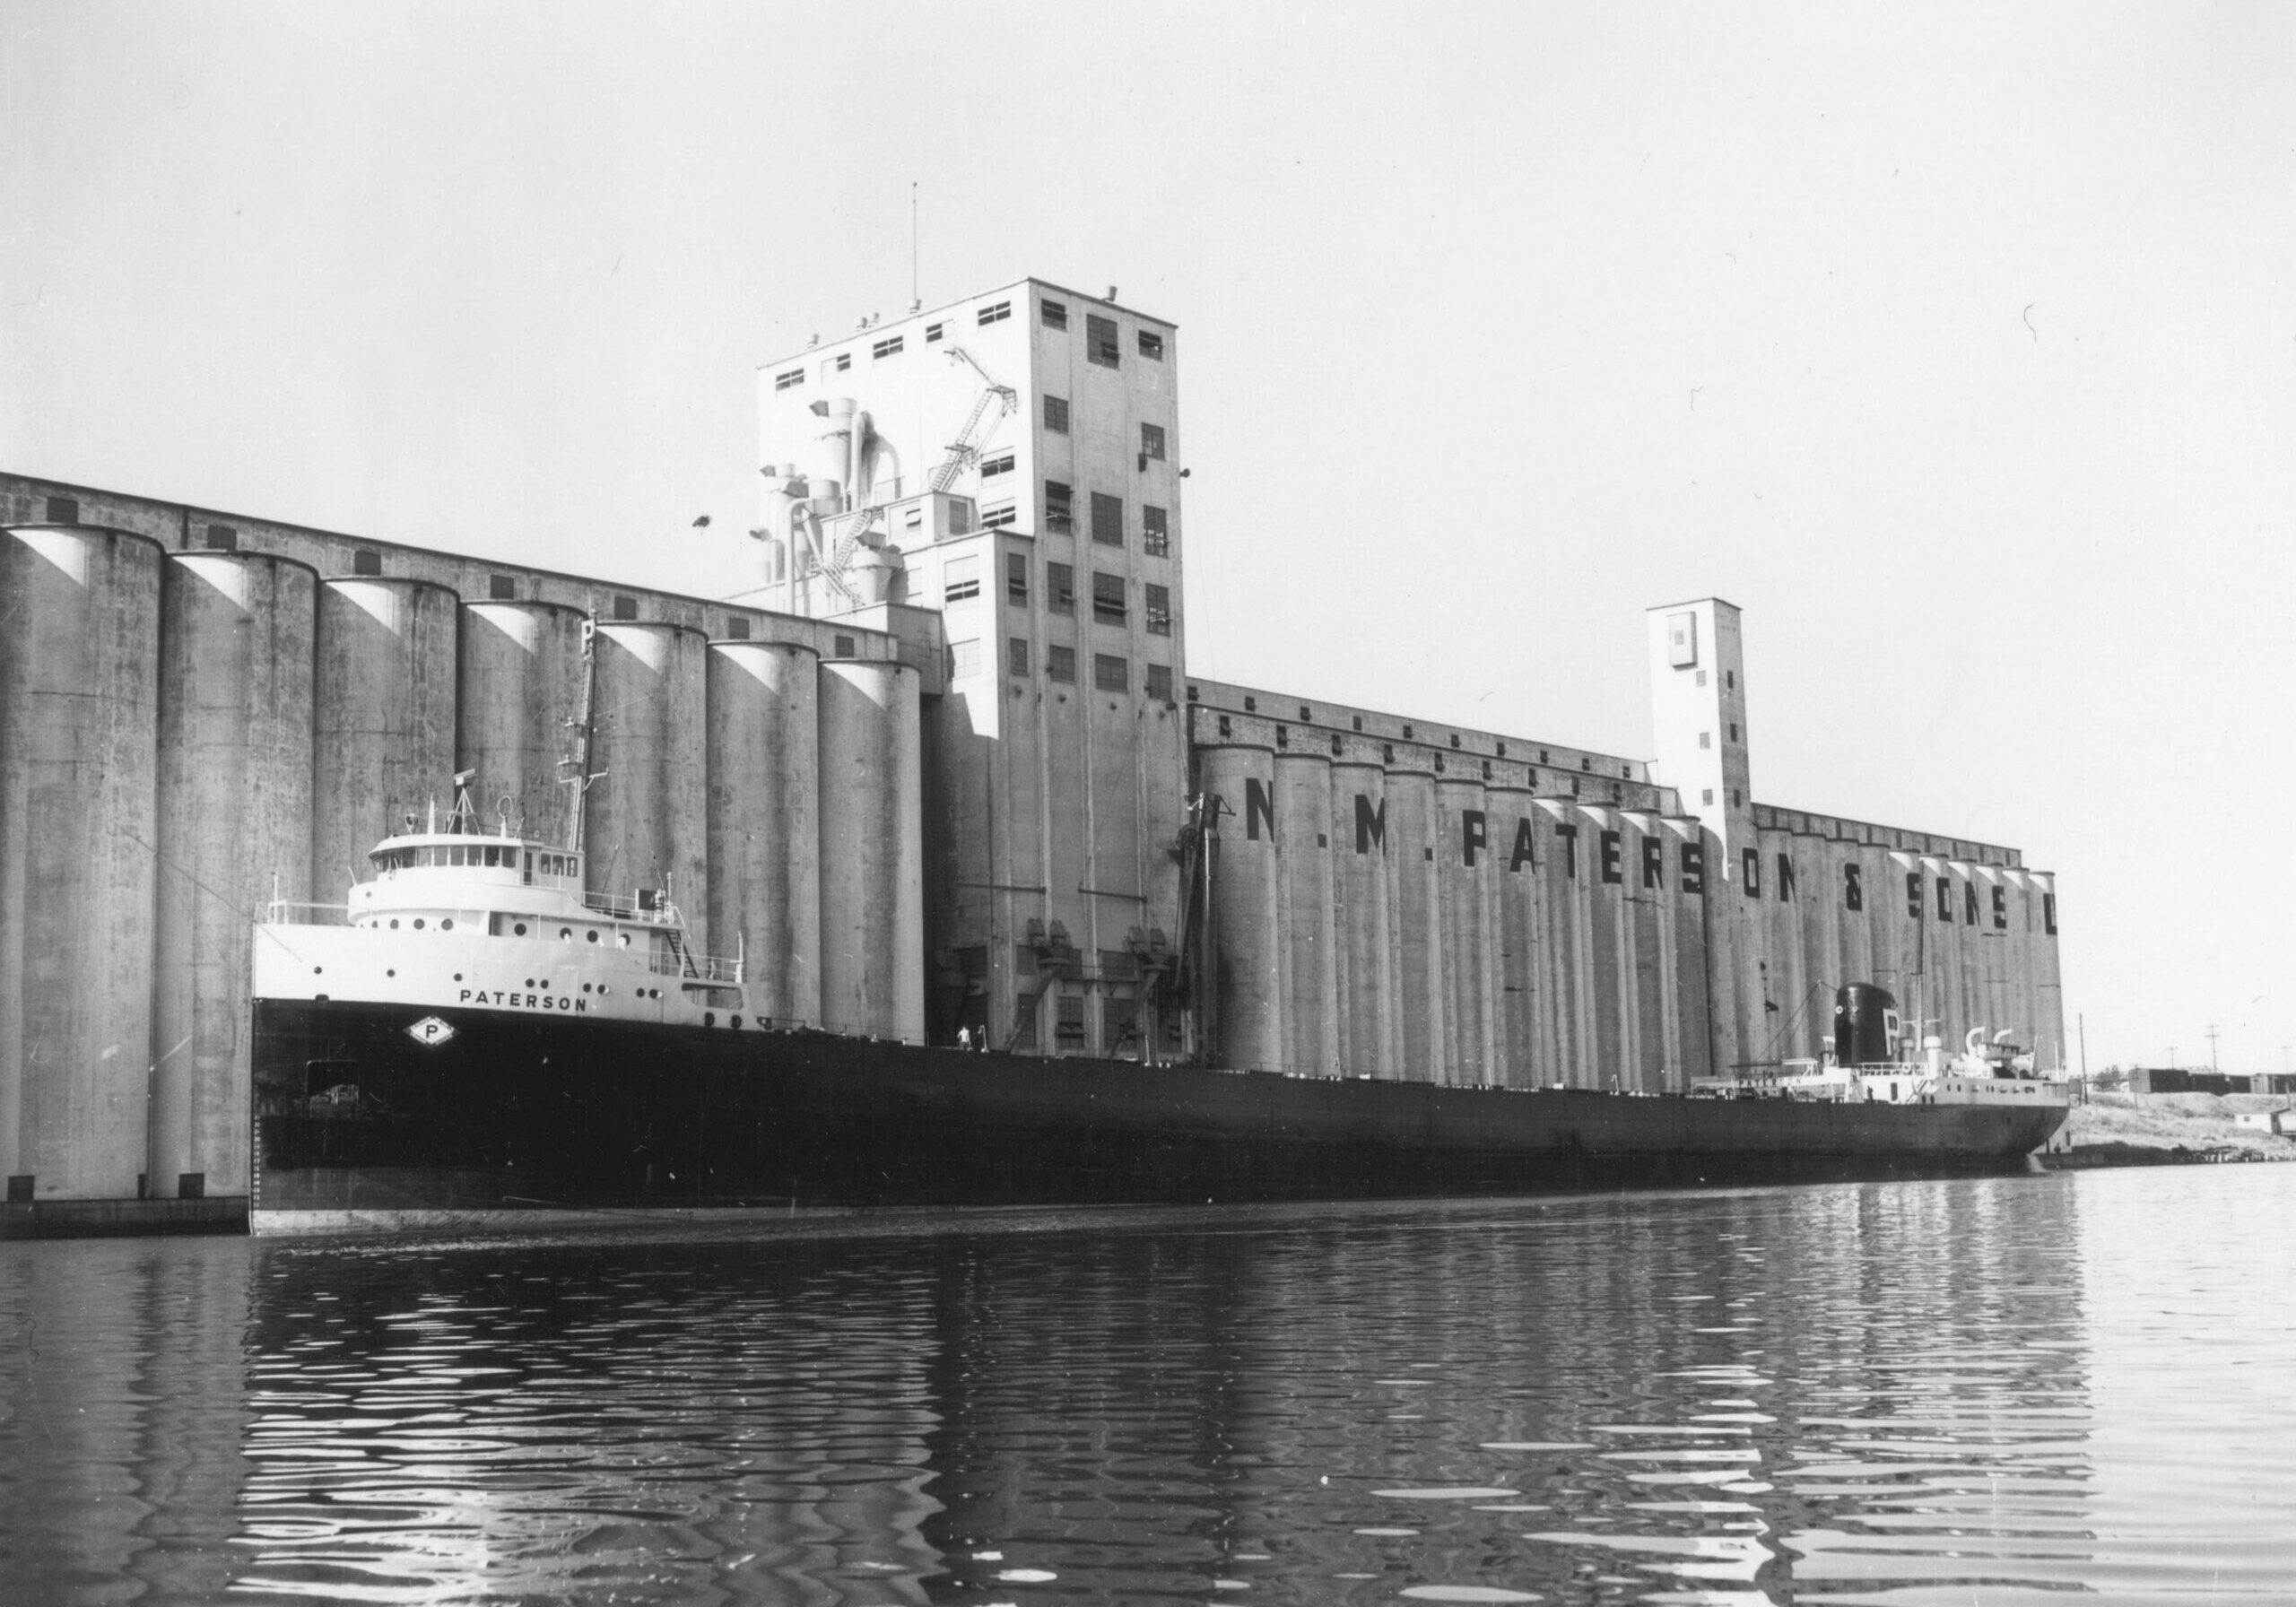 SS Paterson at Paterson7120